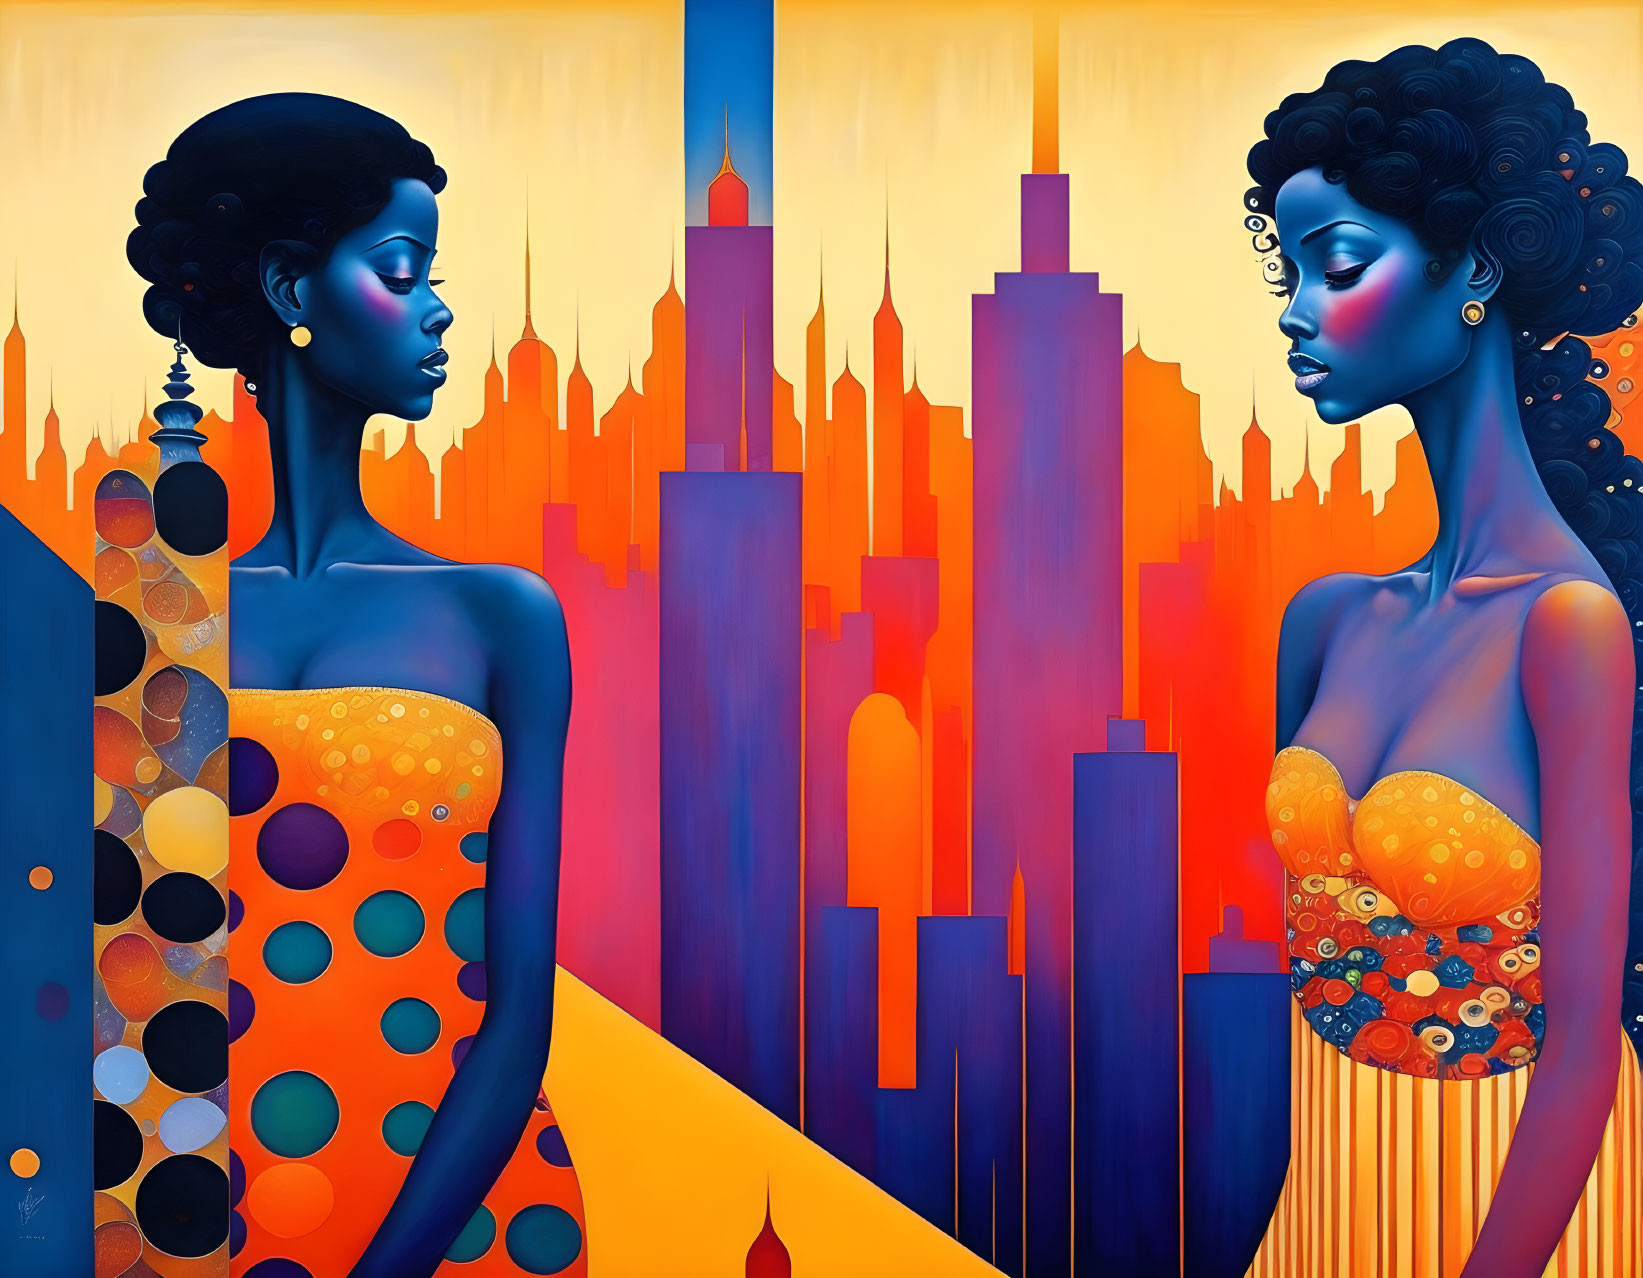 Abstract cityscape with stylized women and vibrant colors